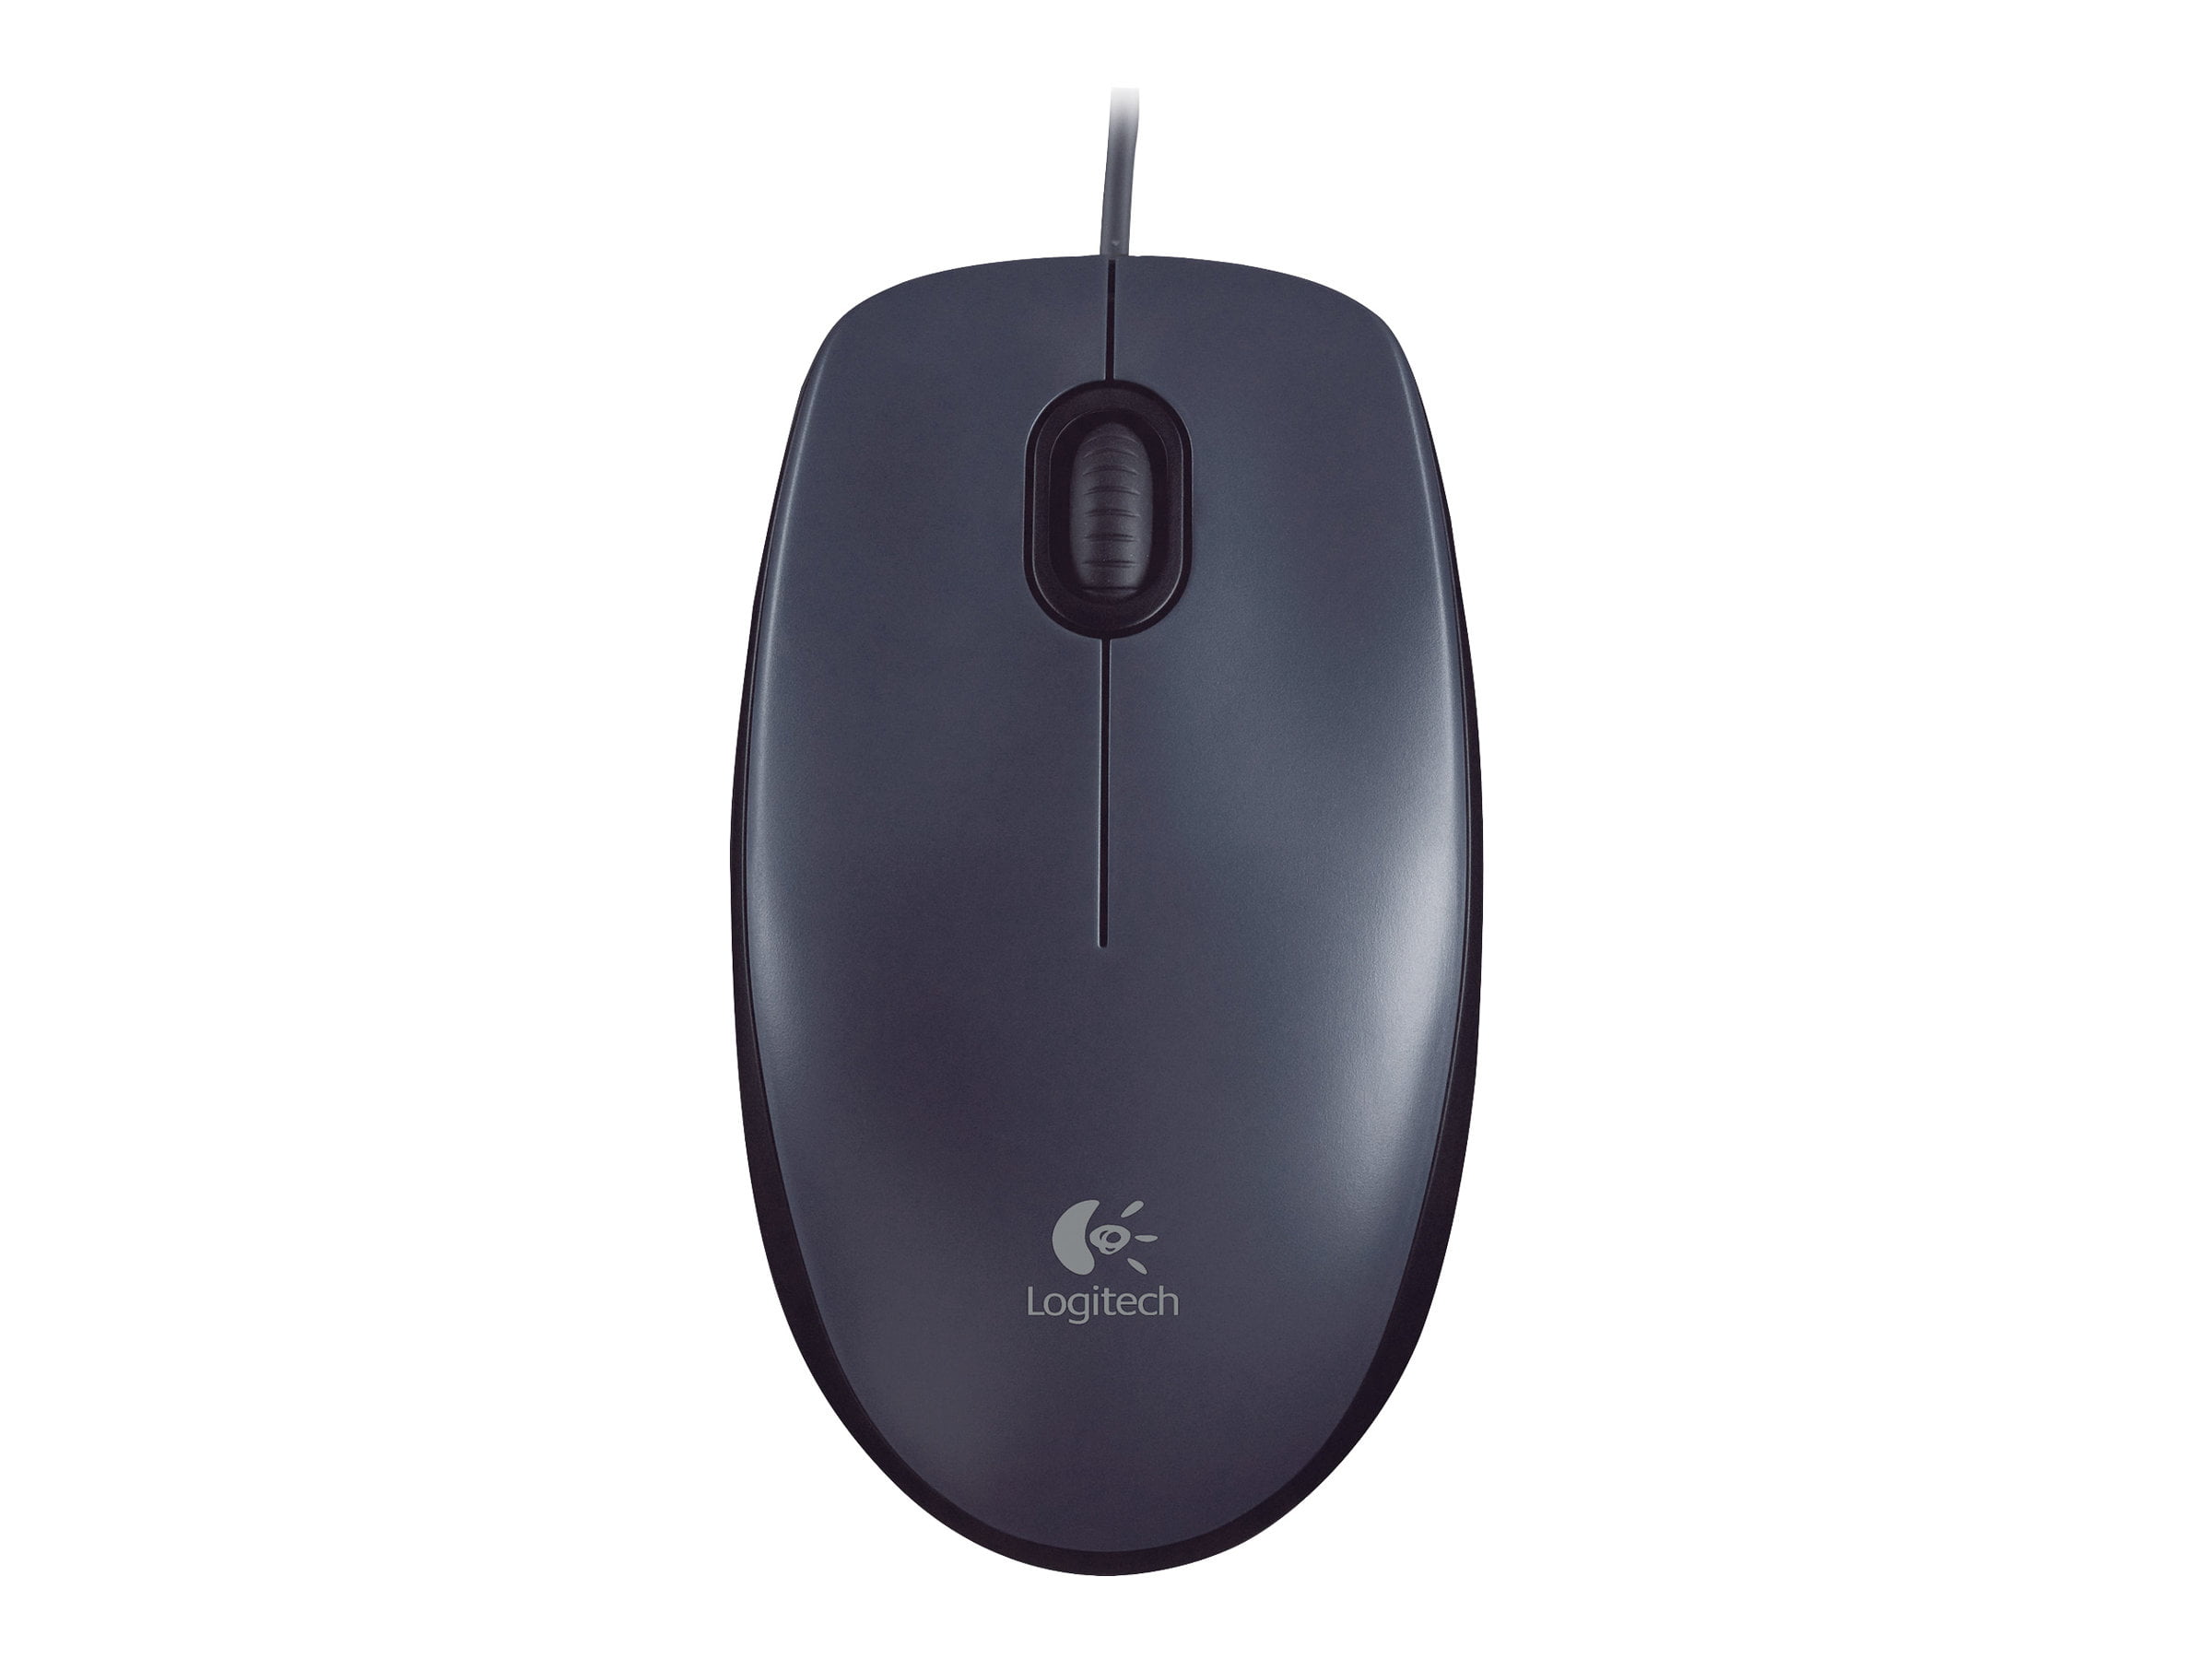 Logitech M90 USB Wired Optical Mouse 1000 DPI for PC Laptop Mac Full Size  Comfort smooth moverL